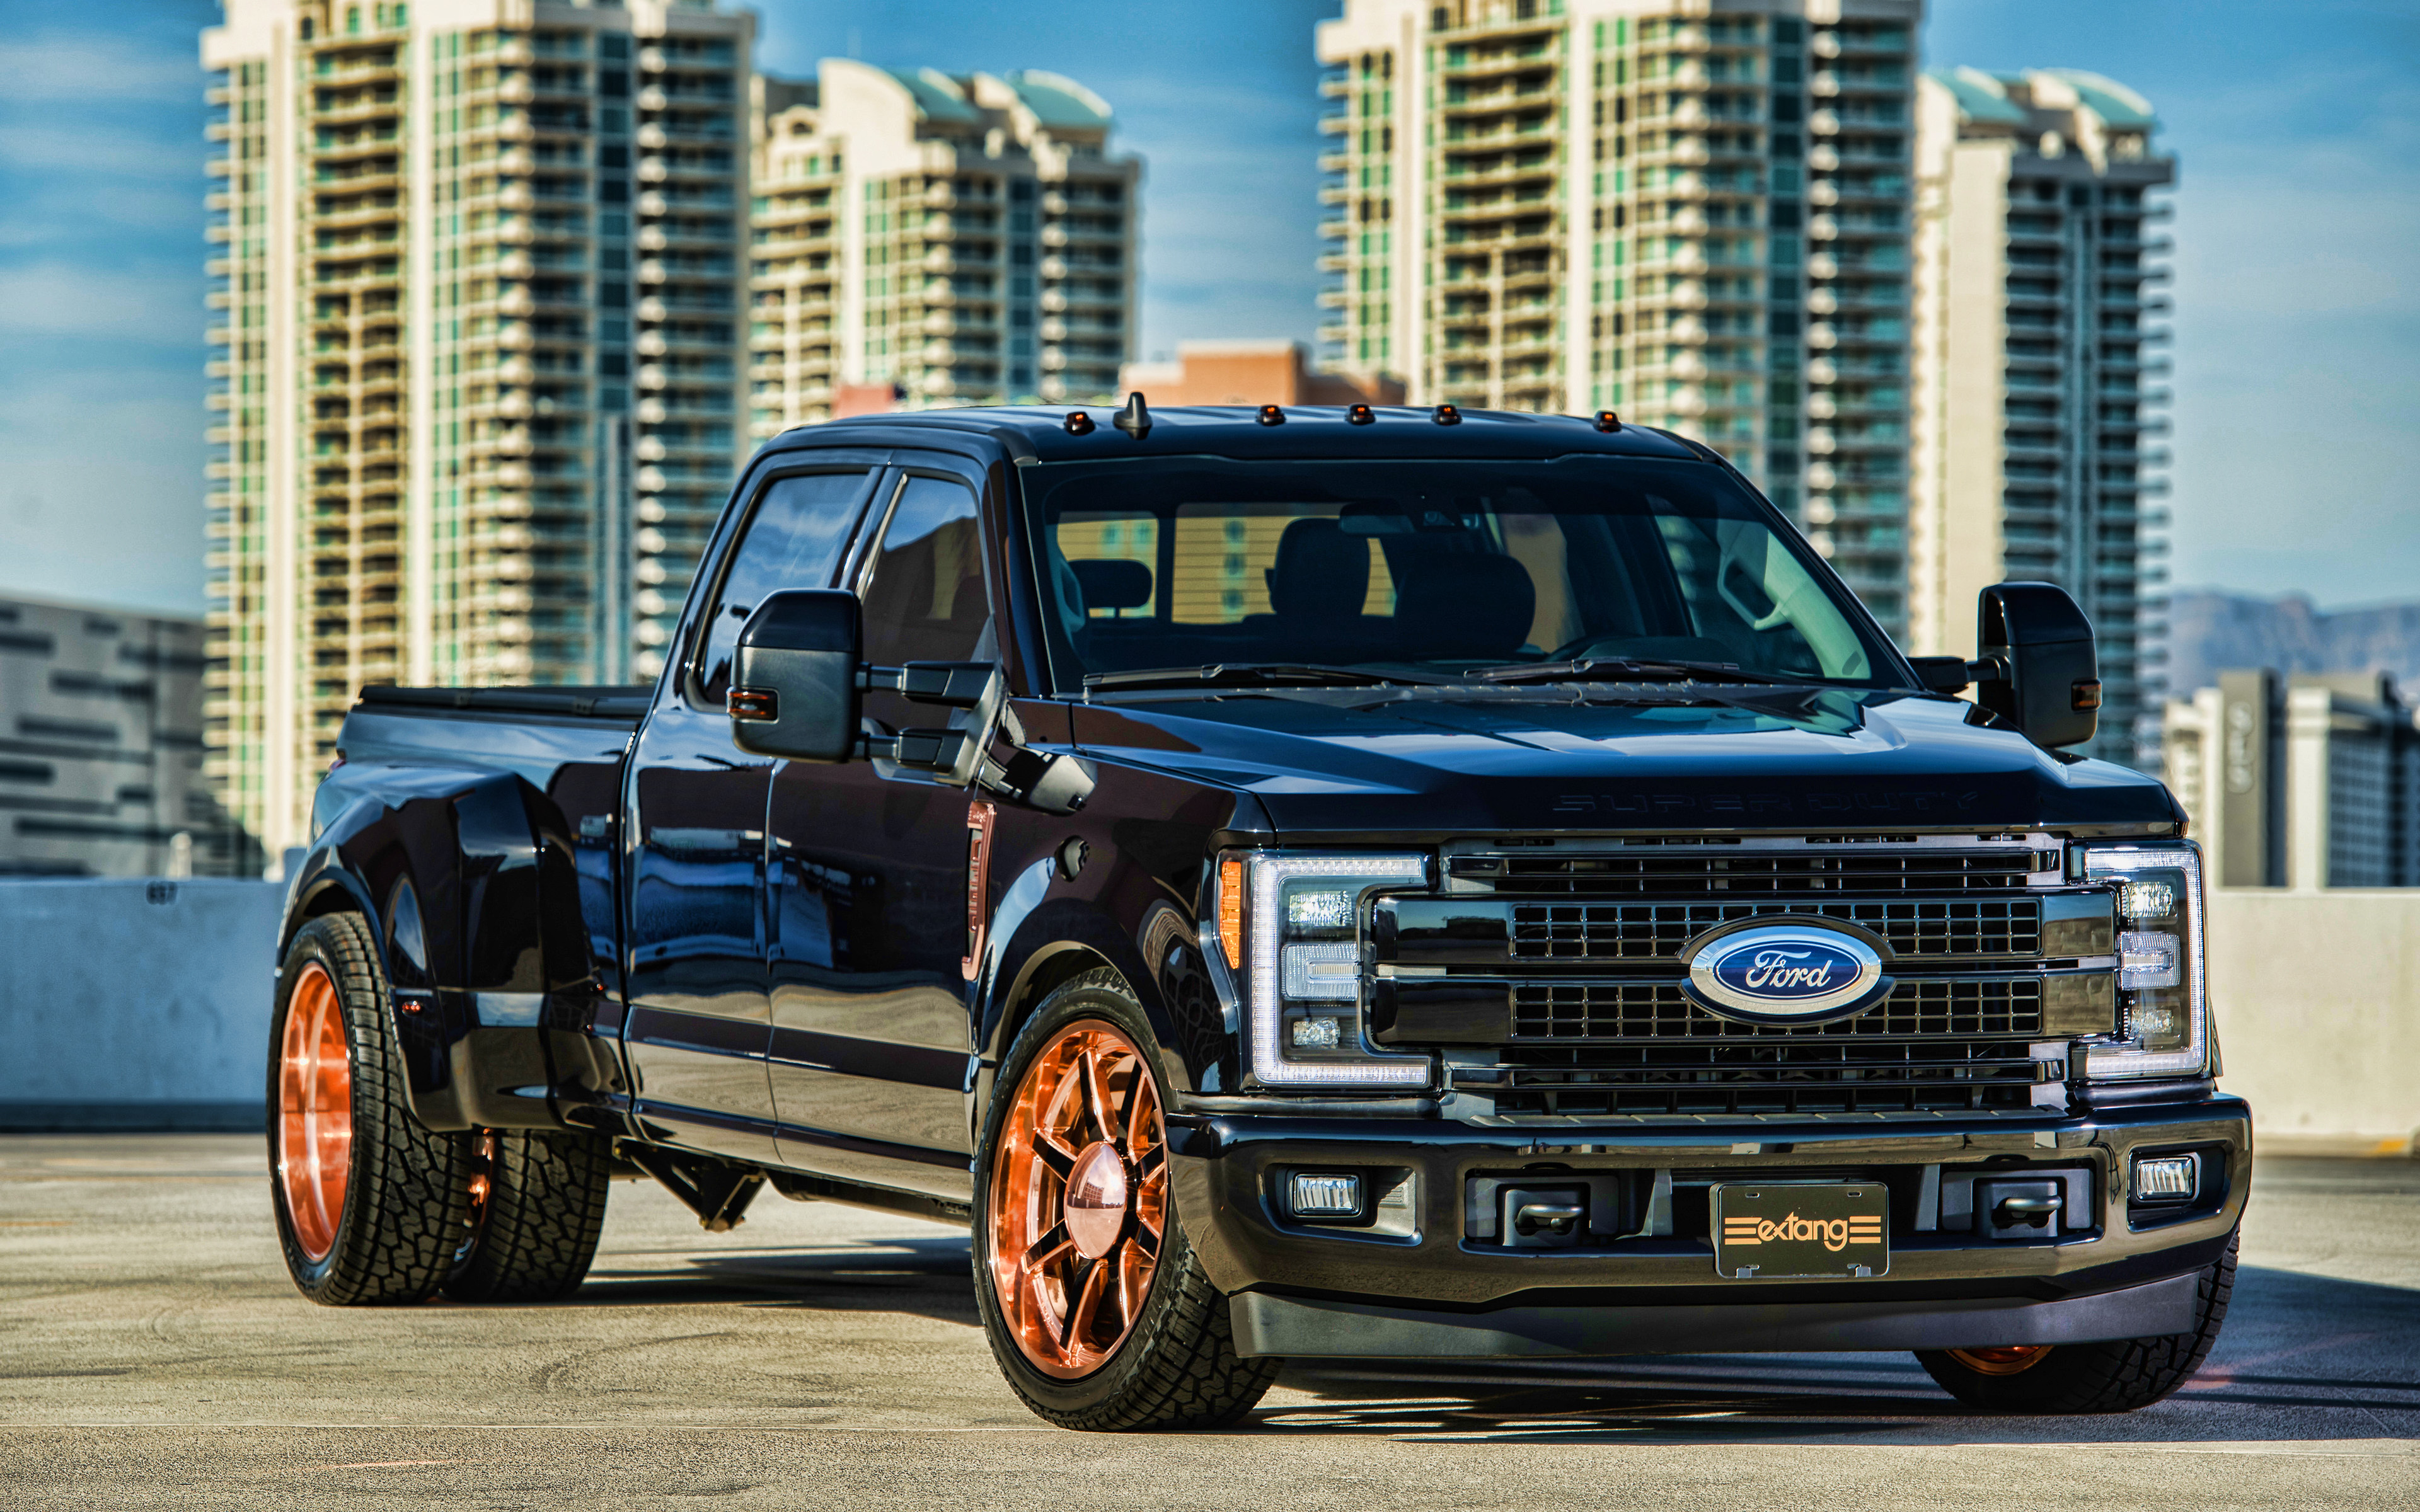 Download wallpapers Ford F-350 Super Duty, 4k, SUVs, 2020 cars, tuning